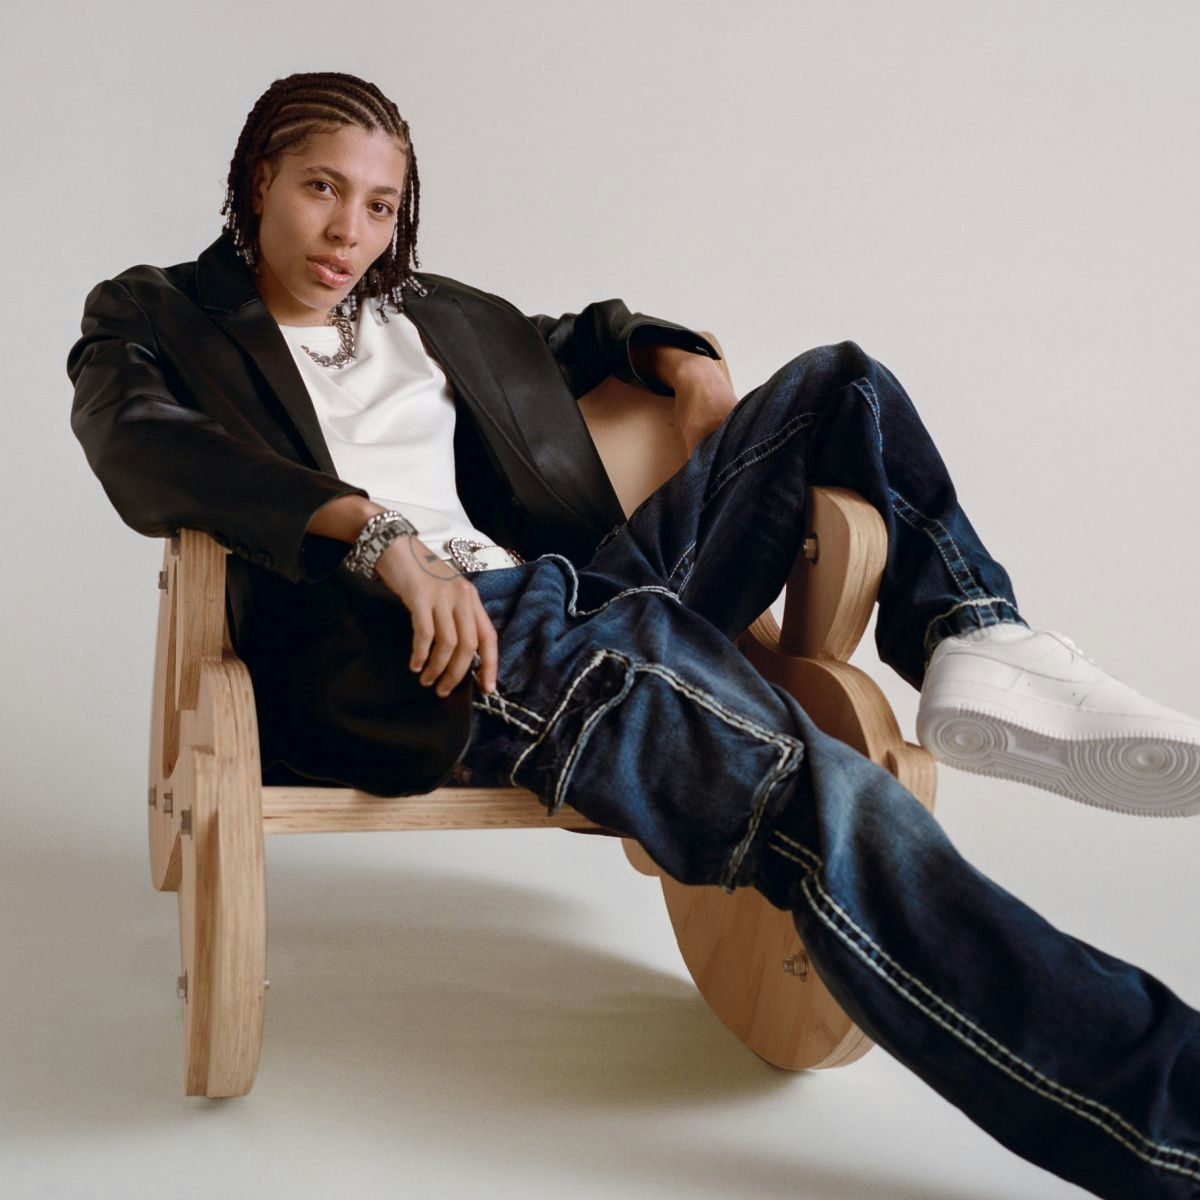 Kai sitting facing the camera, wearing a leather jacket over a white t-shirt and jeans.